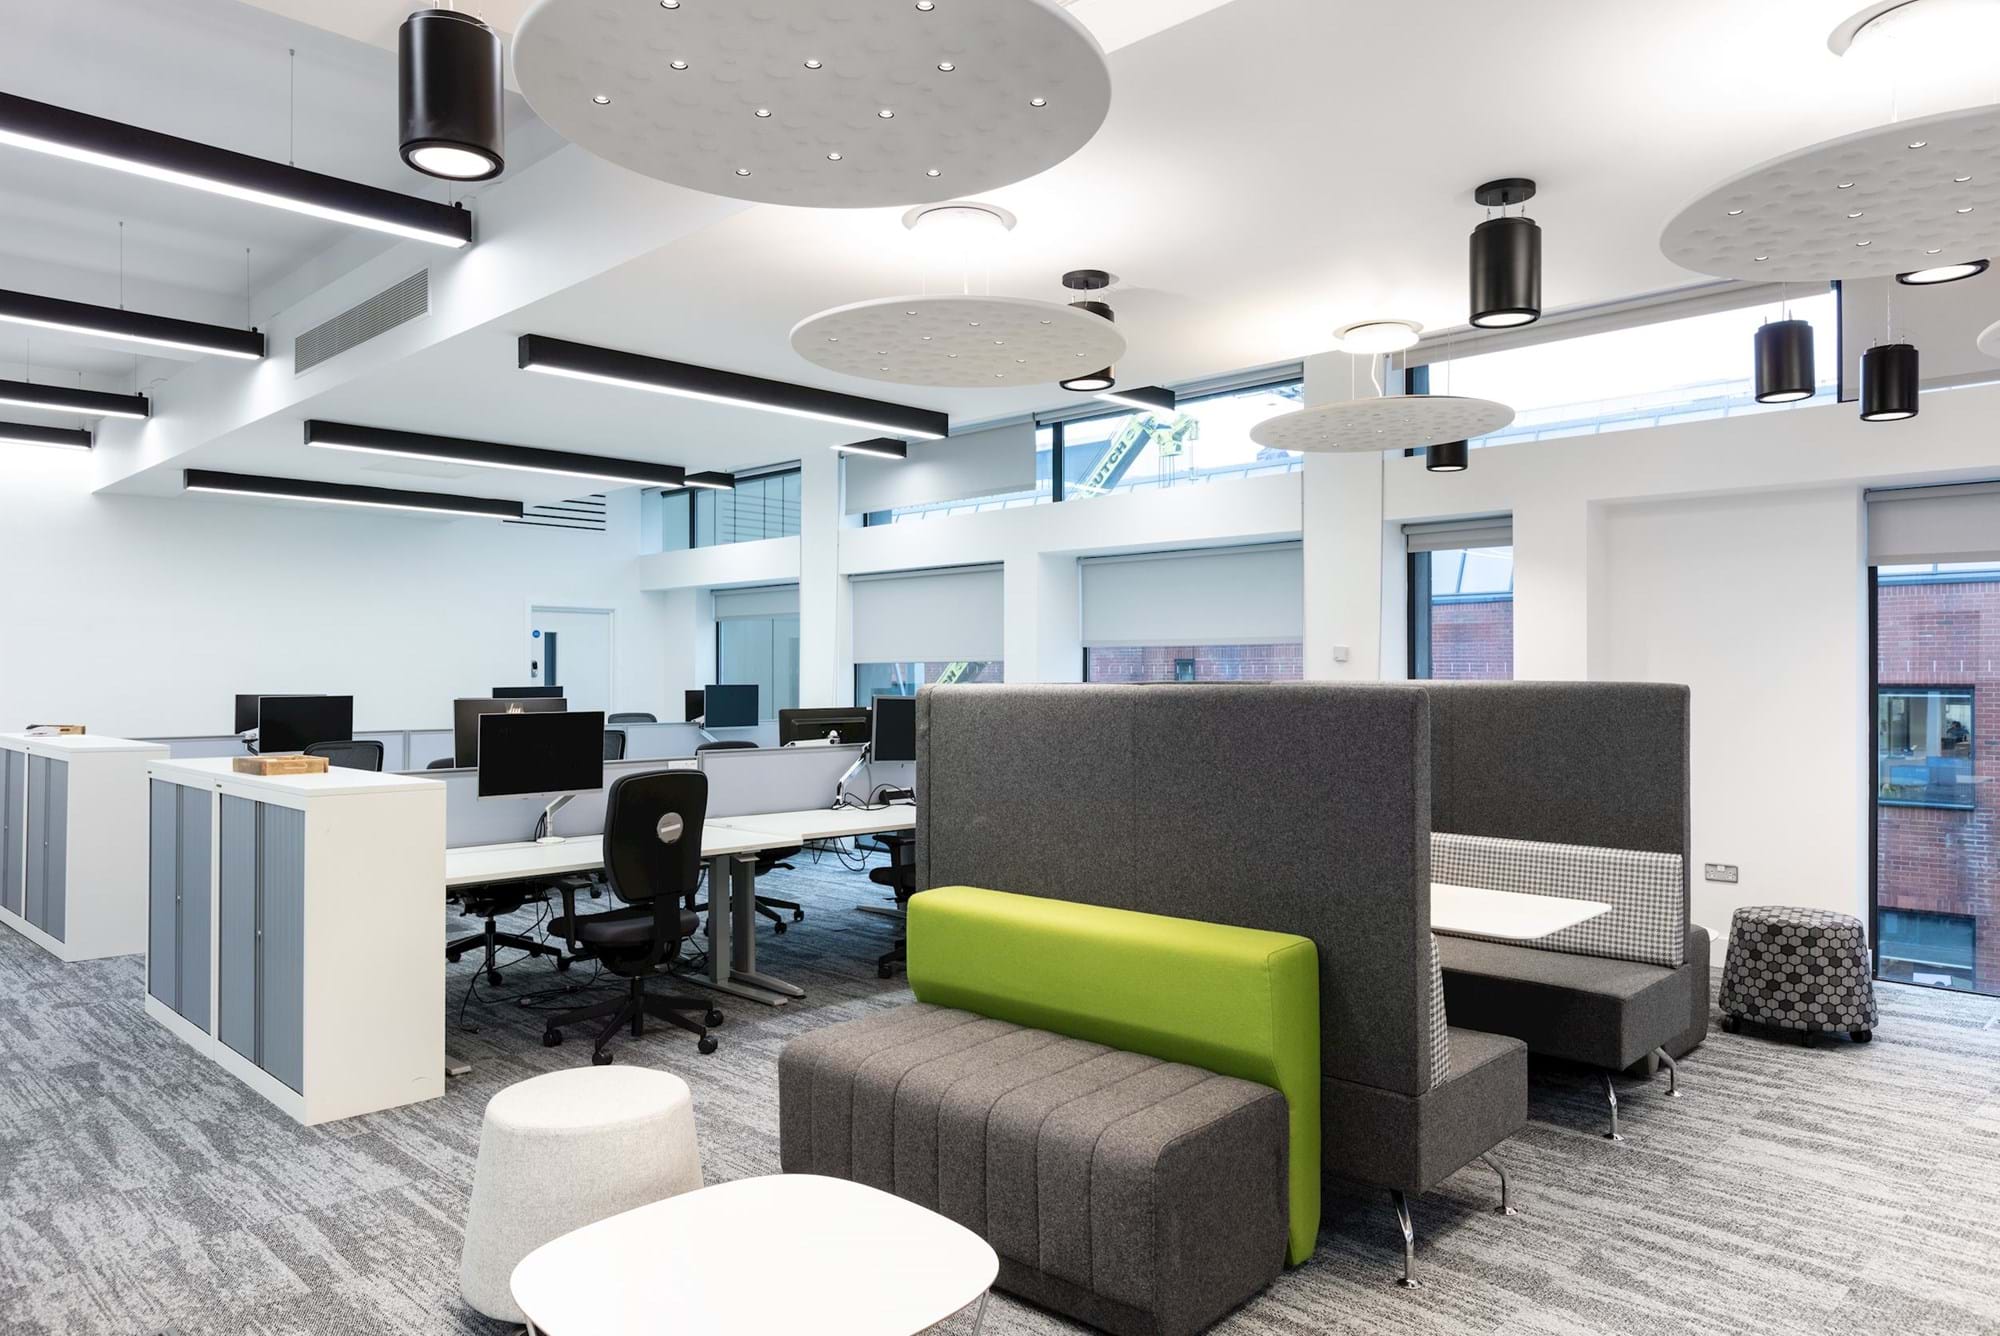 Modus Workspace office design, fit out and refurbishment - Atkins Manchester - Modus_Atkins-49.jpg